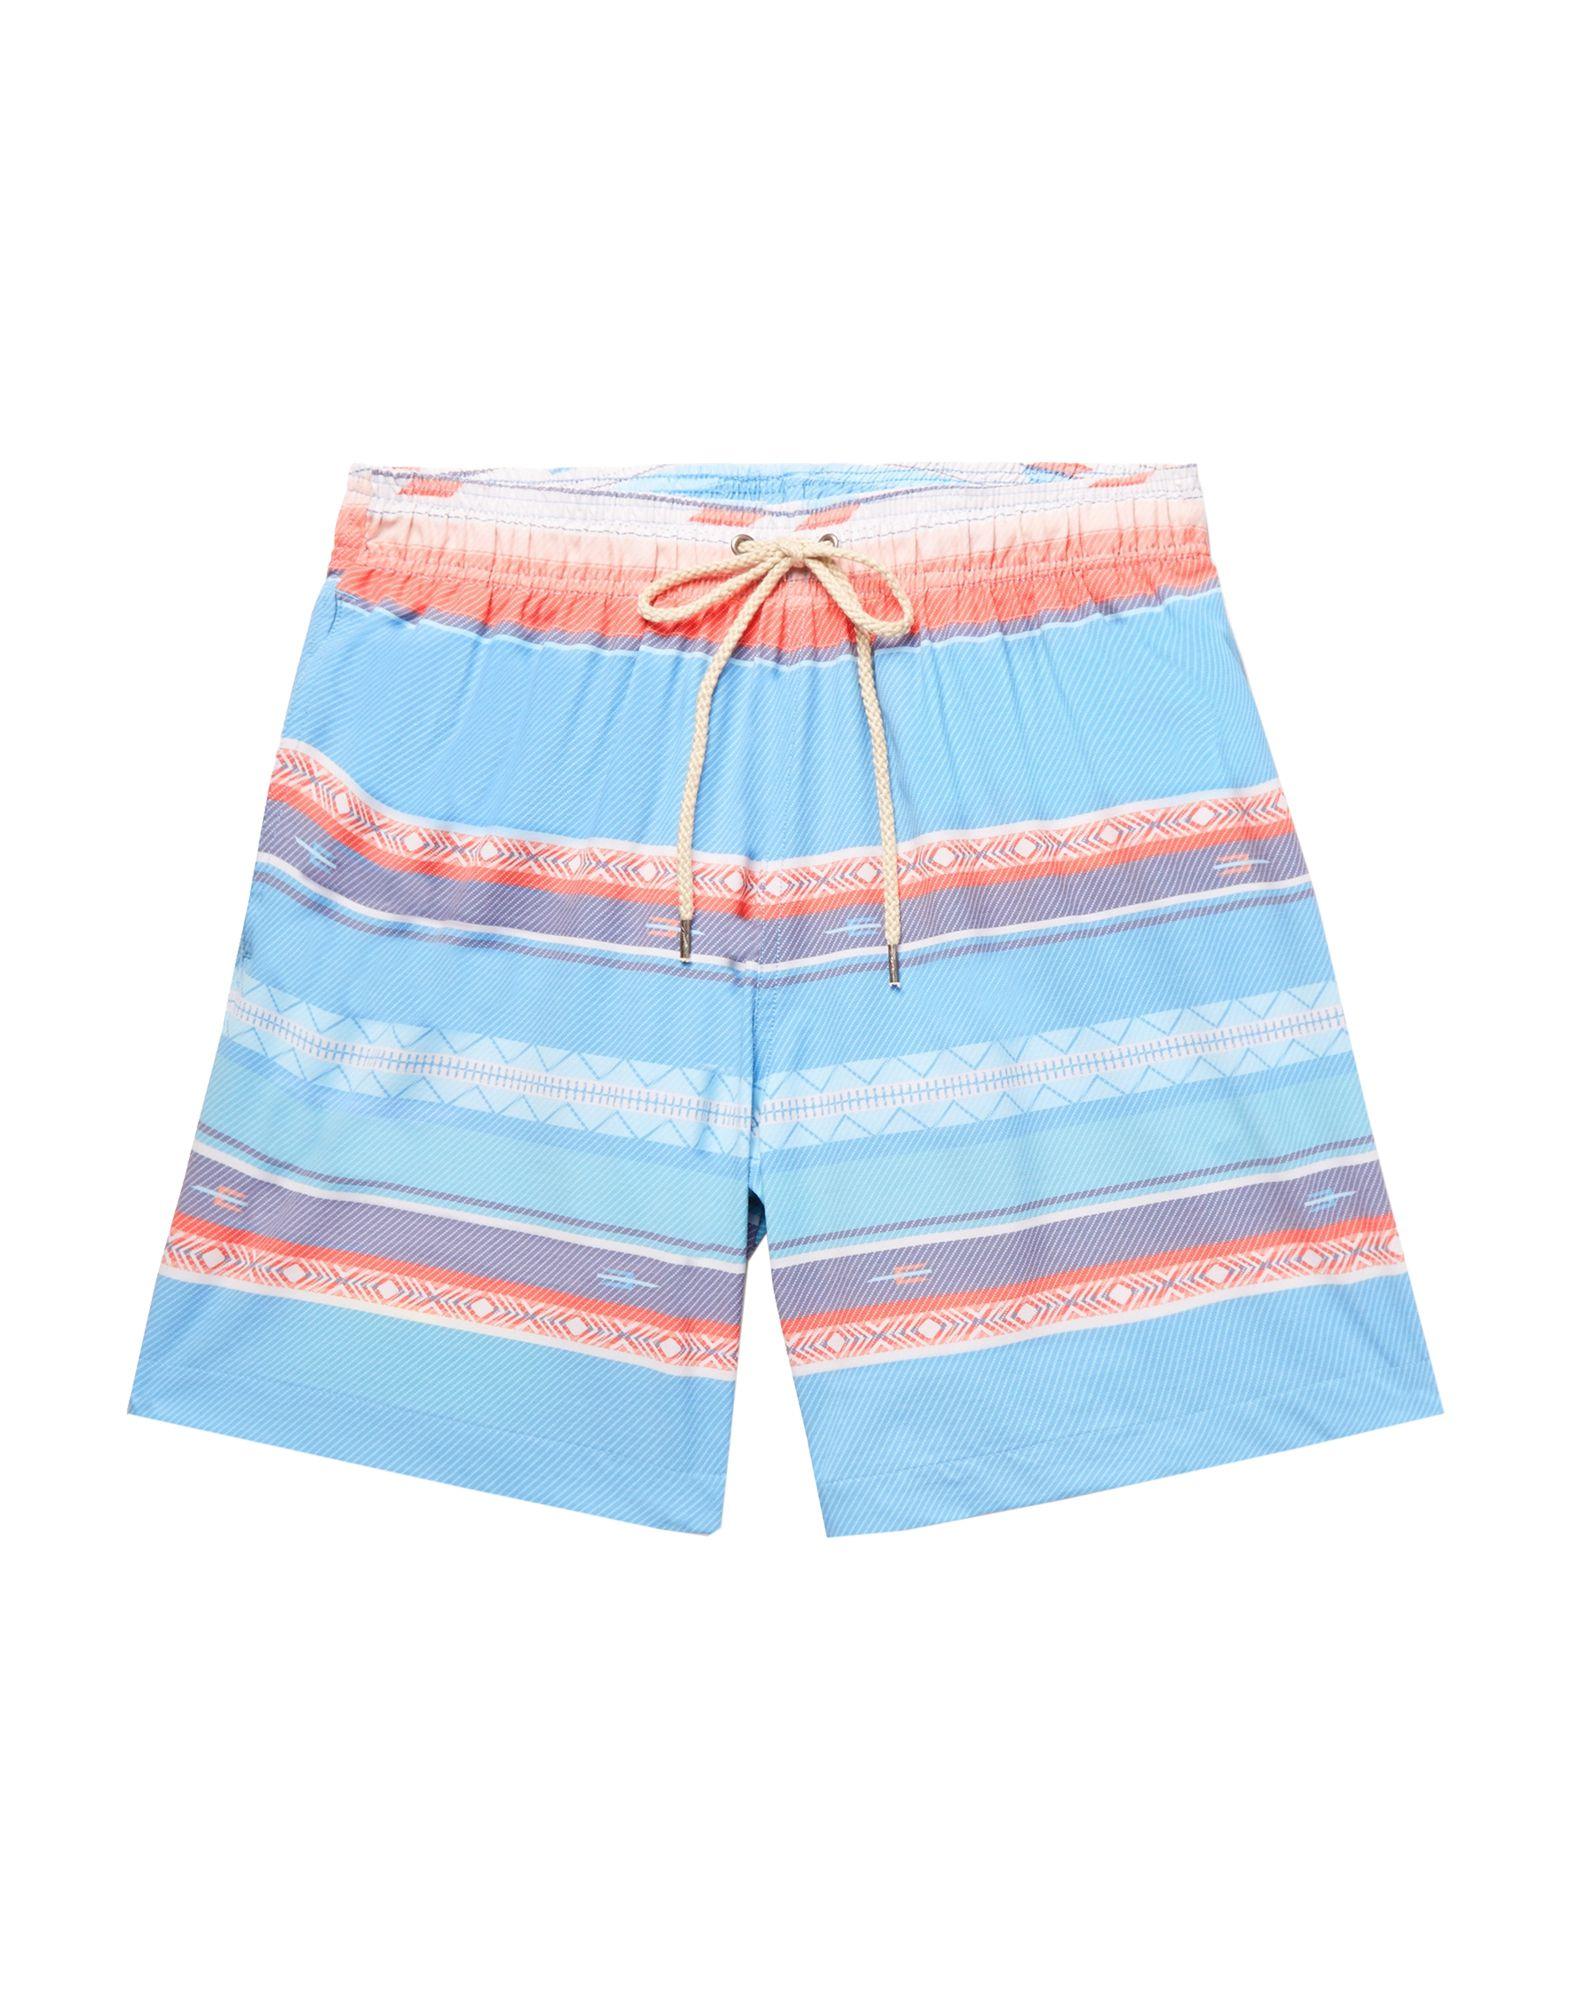 Faherty Brand Cotton Swim Trunks in Sky Blue (Blue) for Men - Save 17% ...